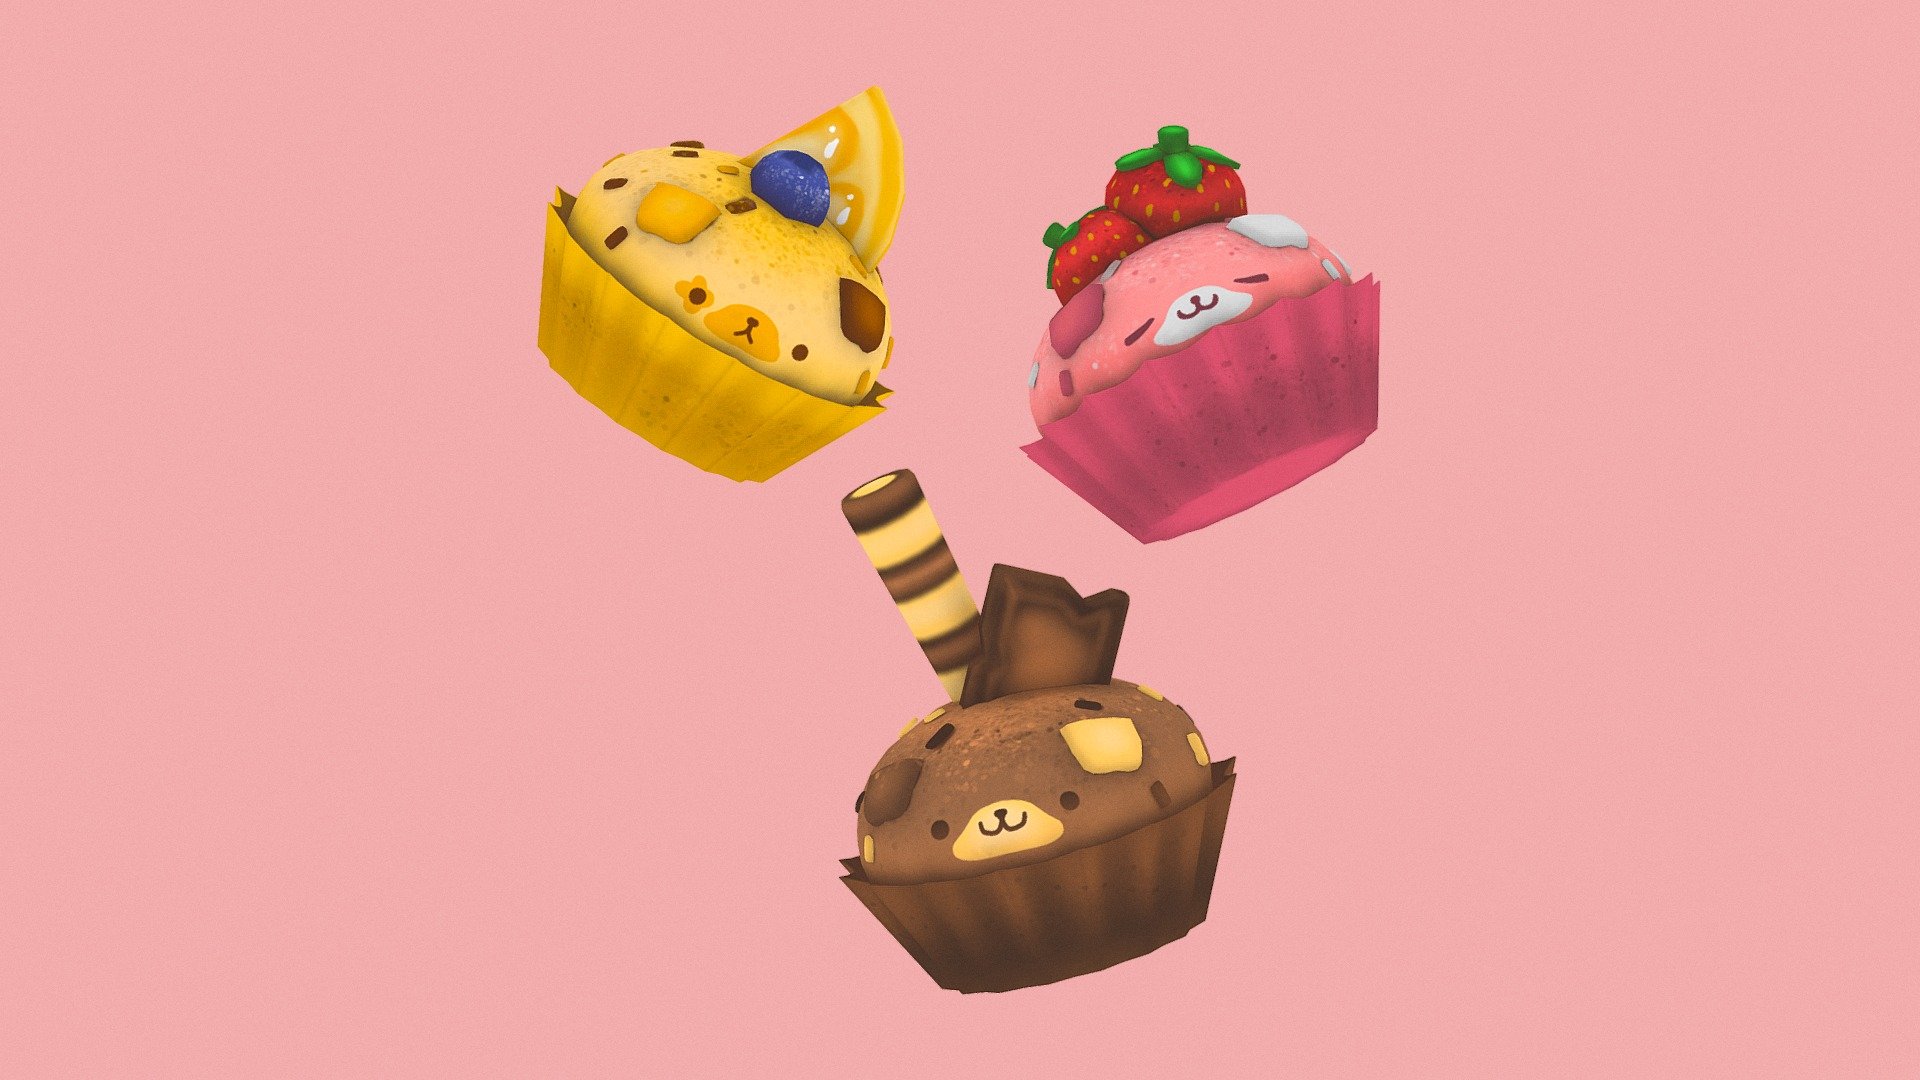 what's better than cupcakes and puppies? 🧁🐶 - Pupcakes 🧁 - 3D model by Marina! (@3dleaf) 3d model